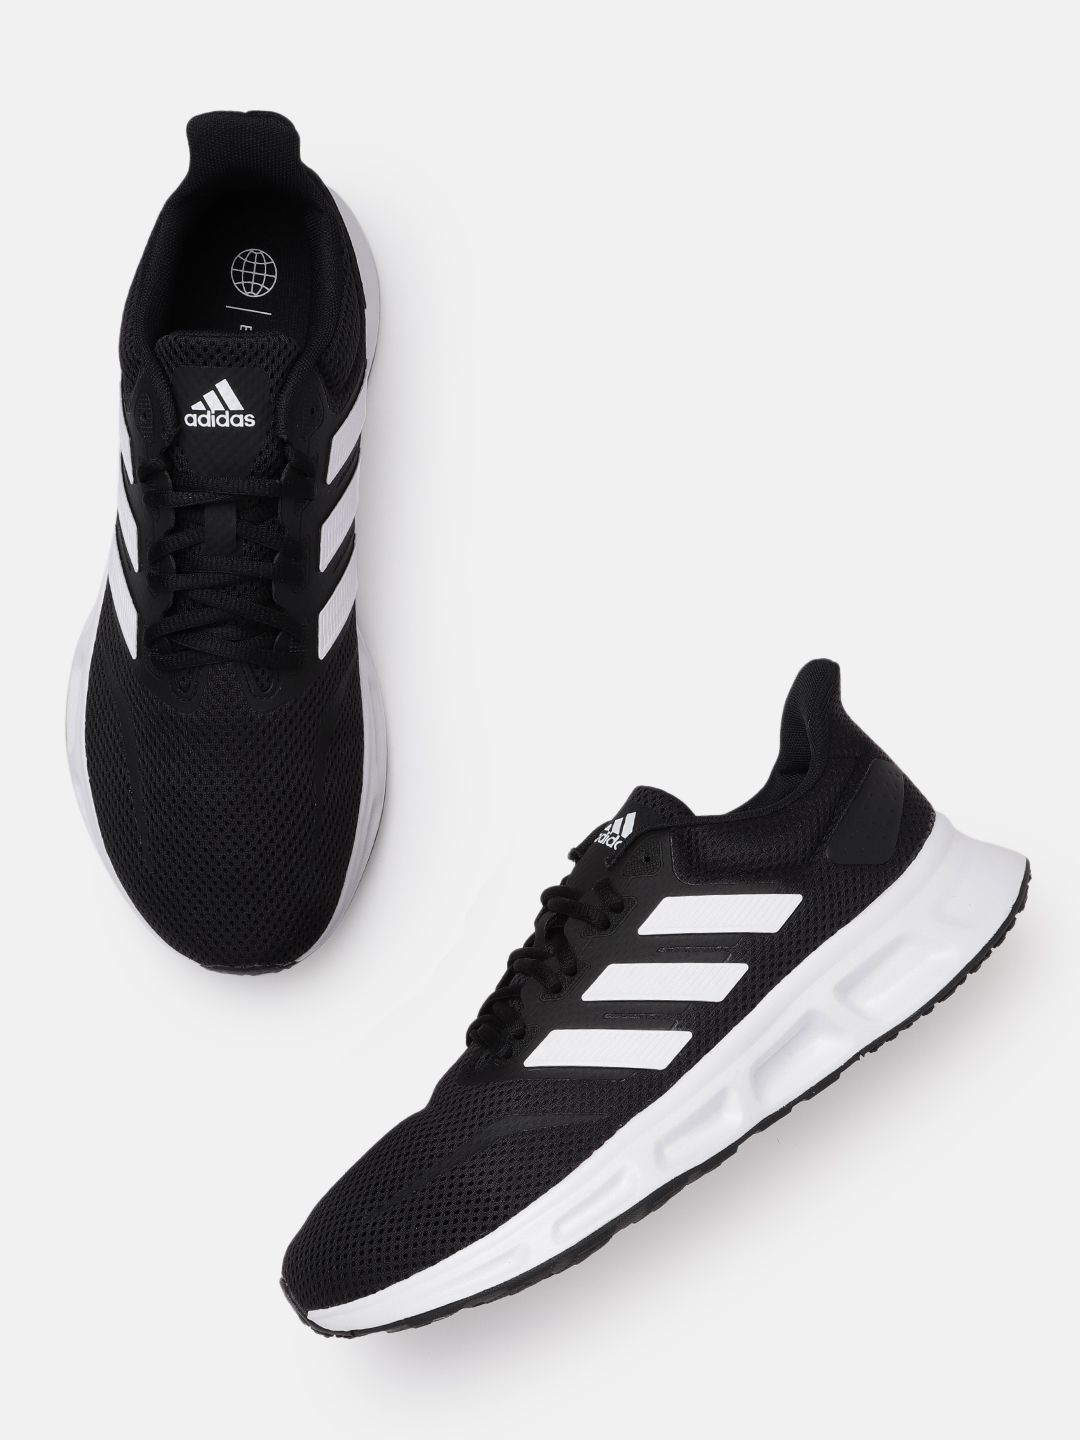 ADIDAS Unisex Black & White Woven Design Show The Way 2.0 Sustainable Running Shoes Price in India